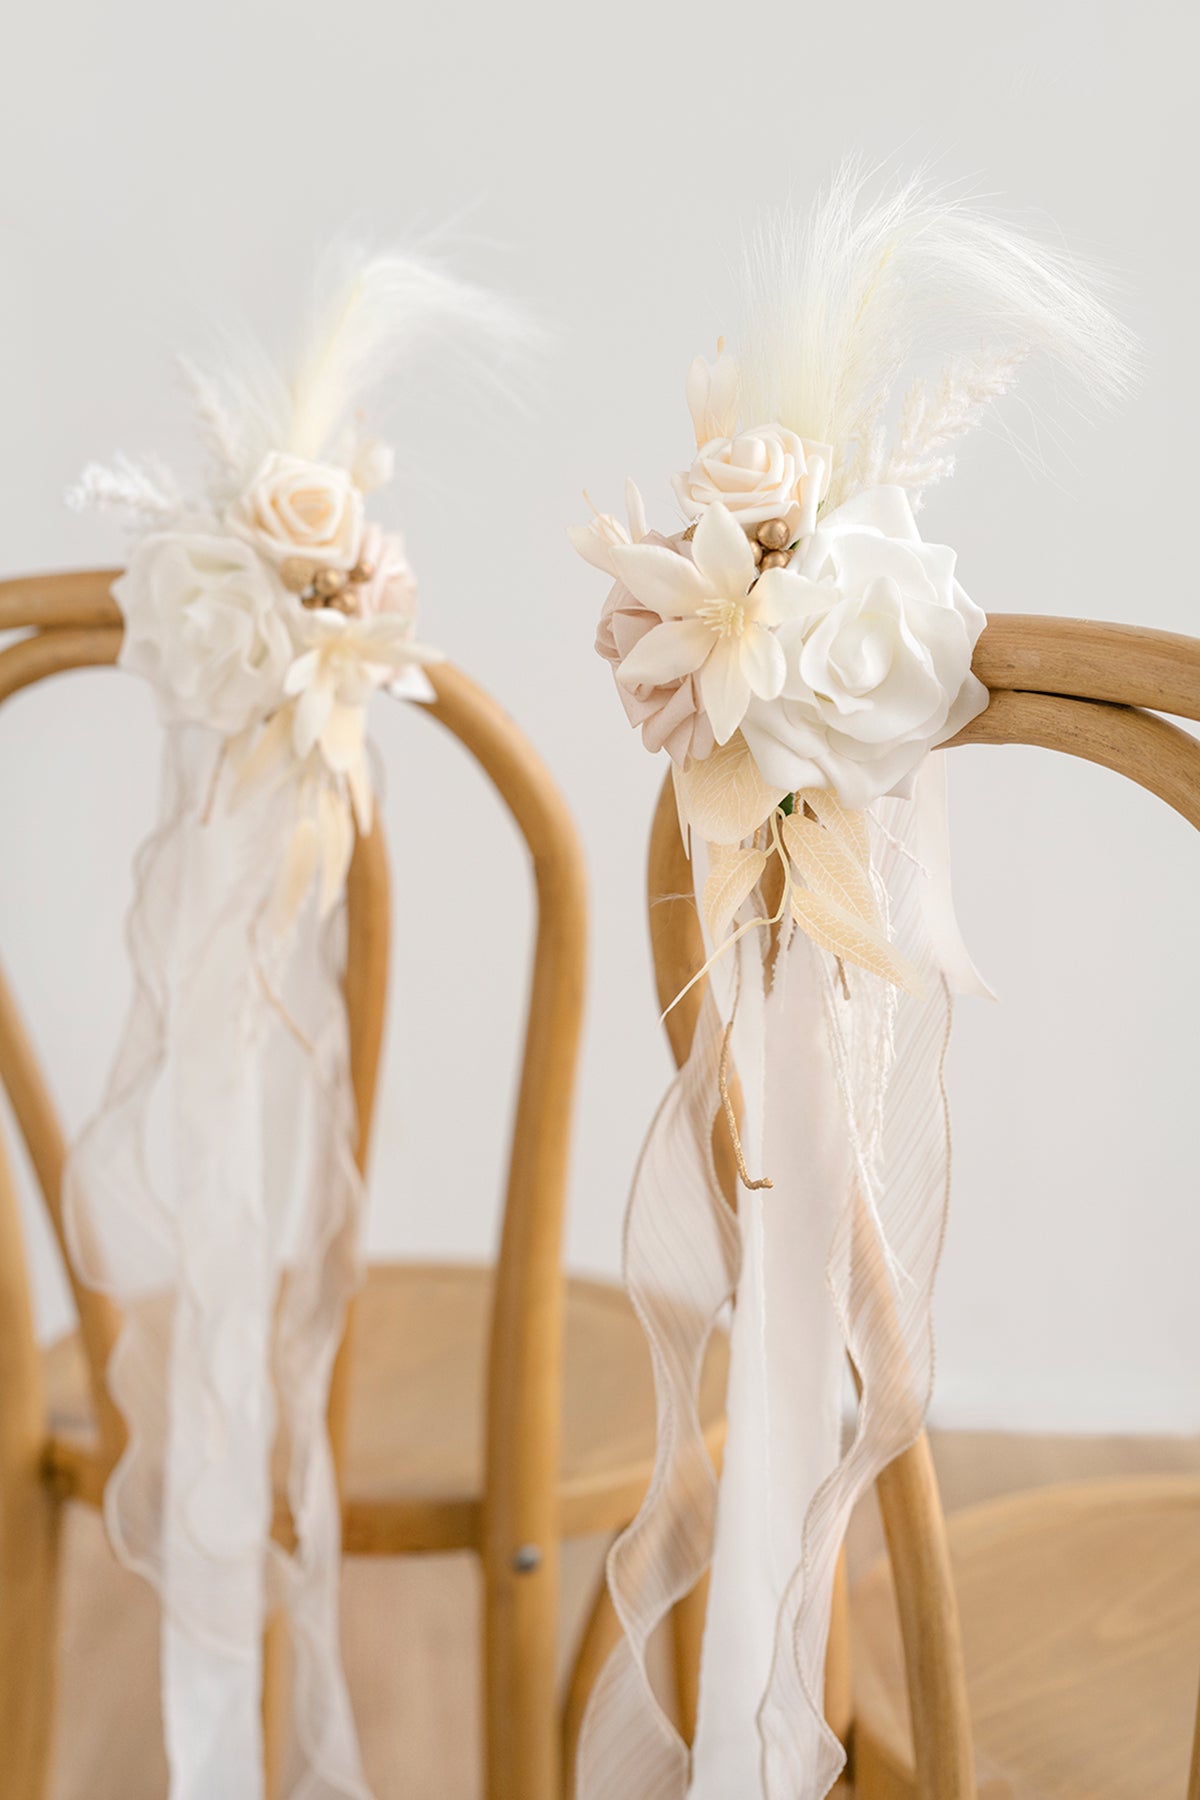 Wedding Aisle Decoration Pew Flowers in White & Beige | Clearance